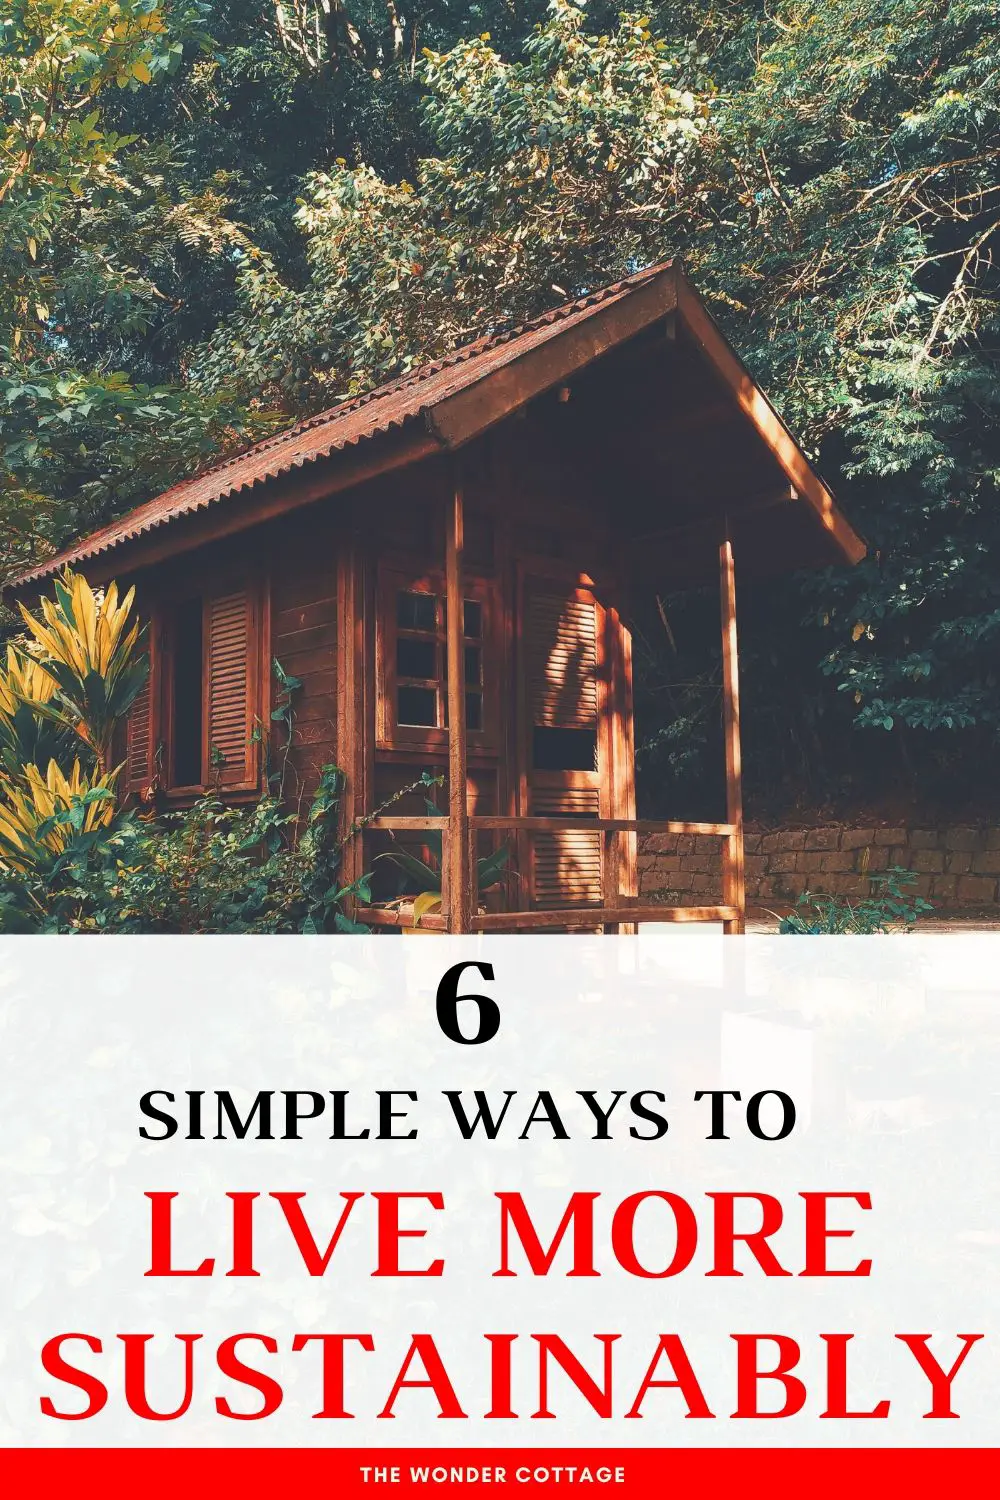 6 simple ways to live sustainably